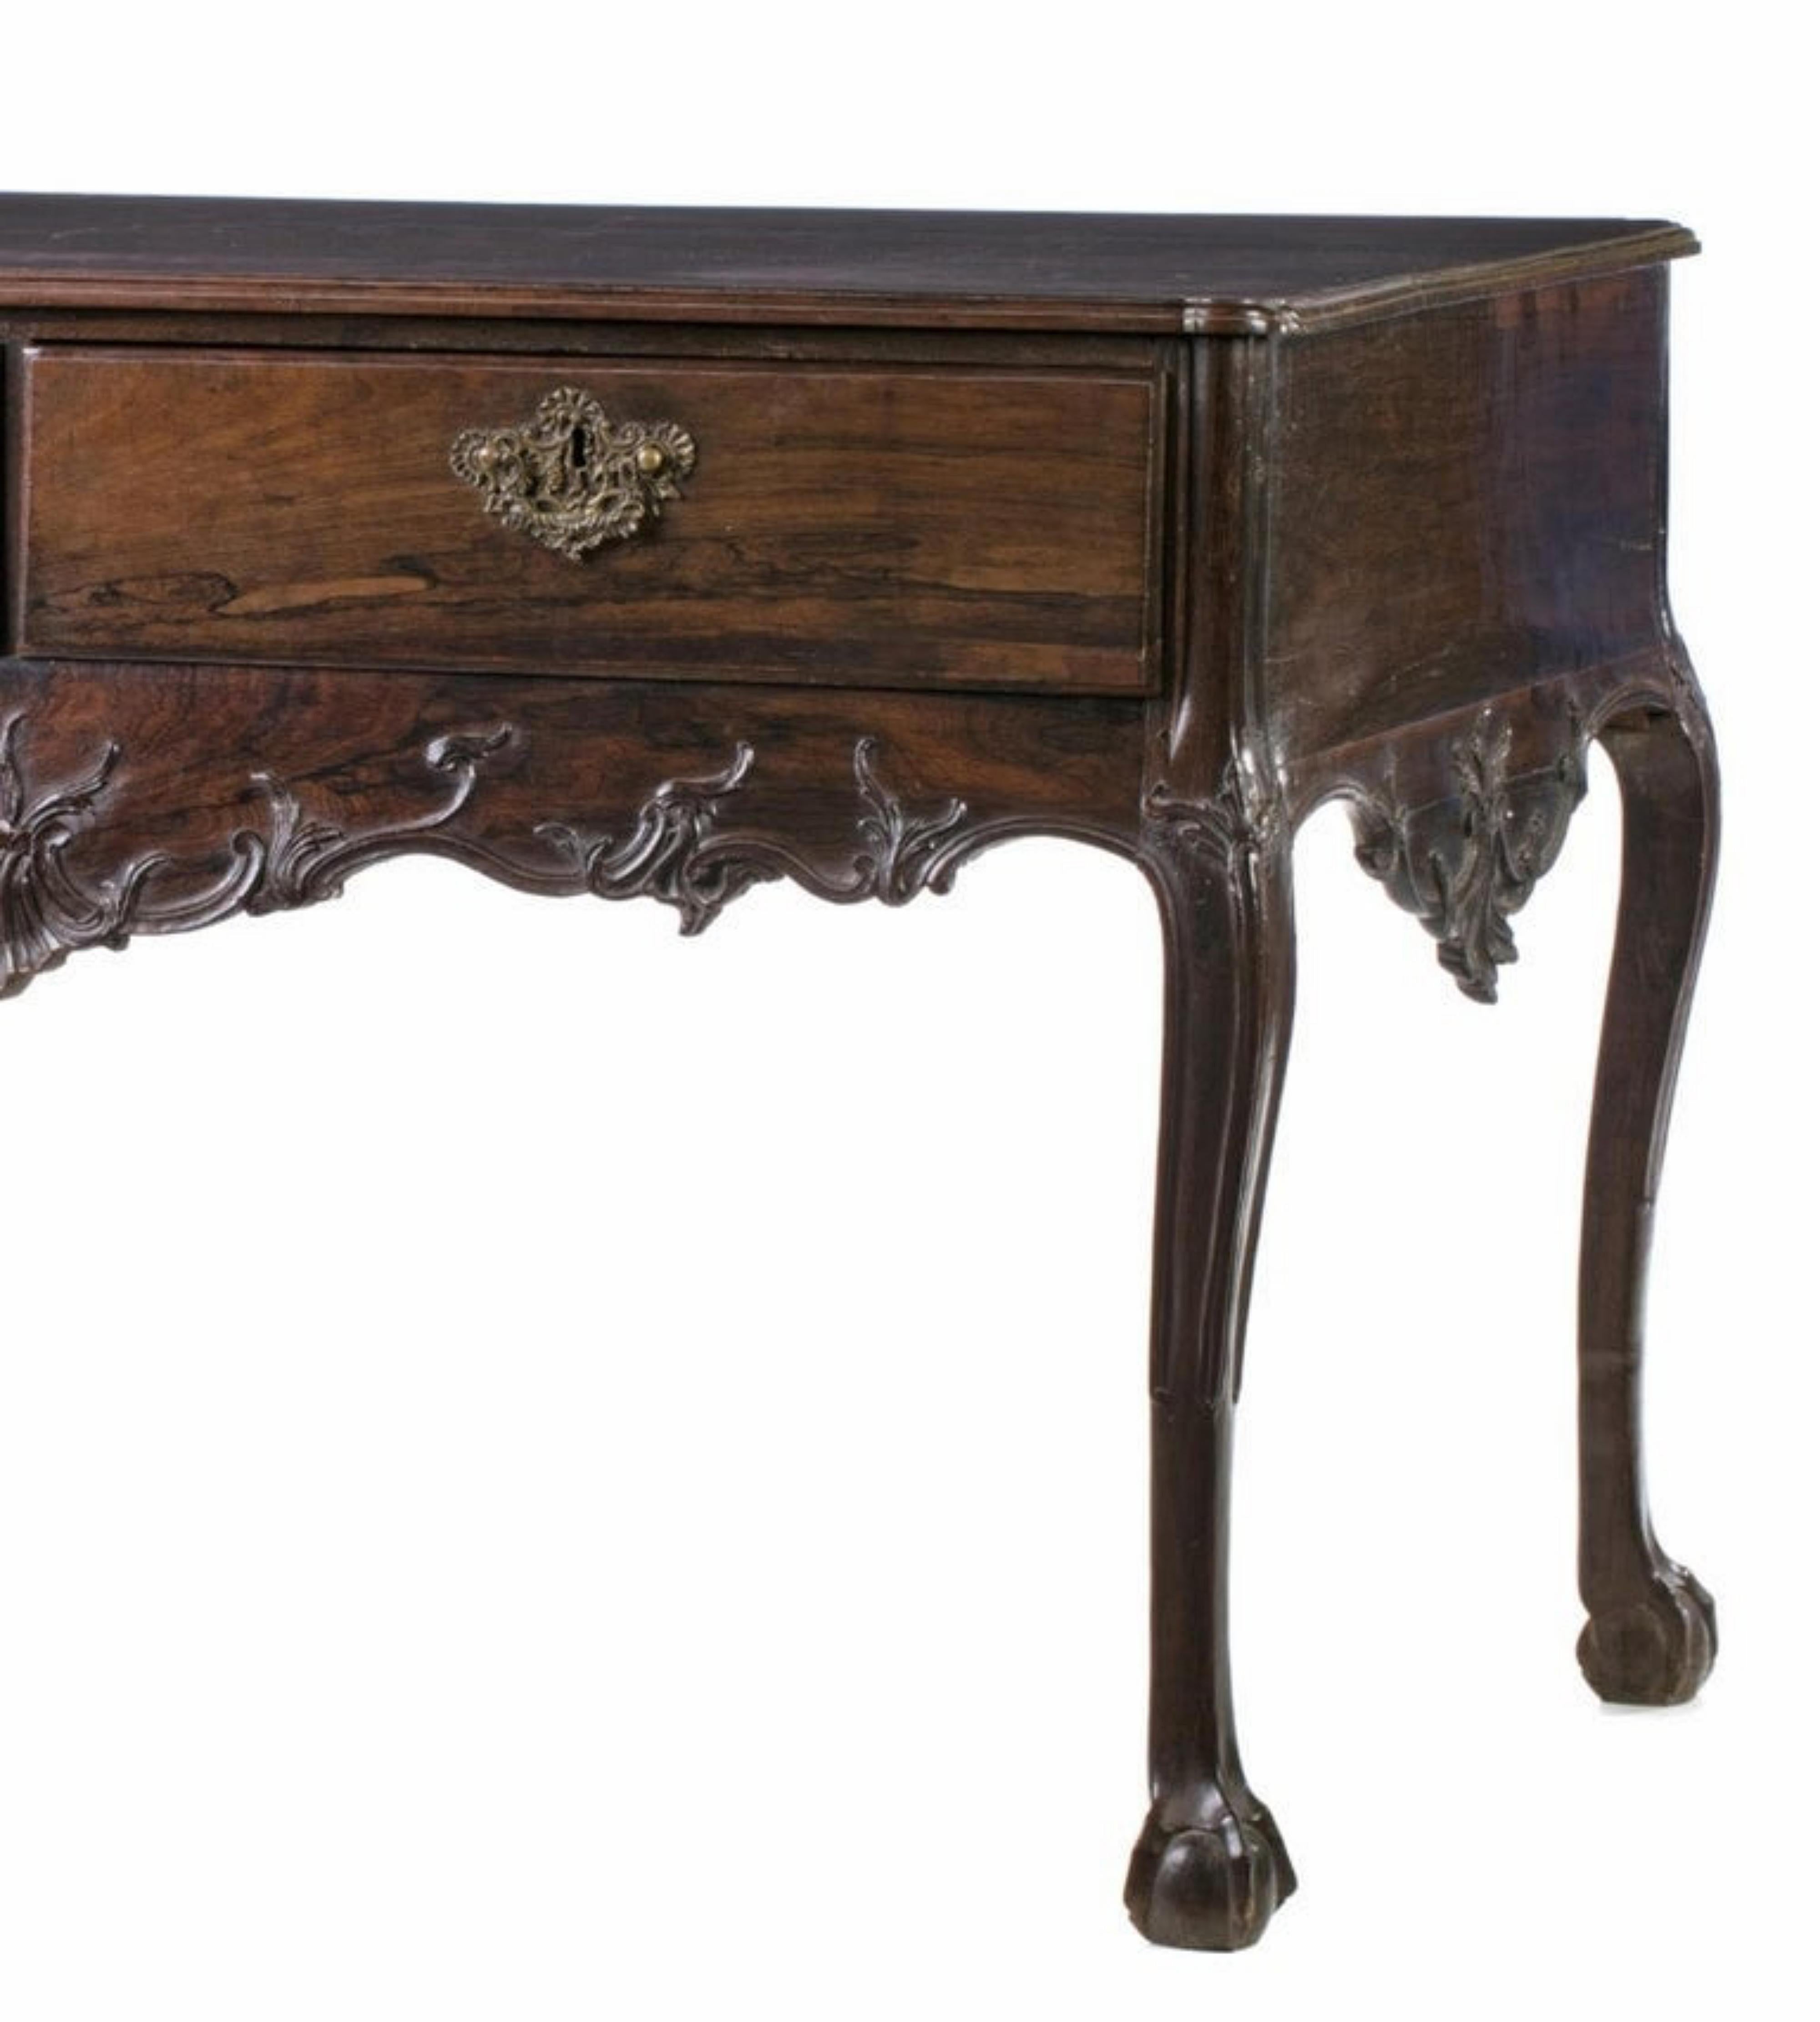 Rare from Museum Portuguese table
18th century
in rosewood wood,
with two drawers simulating four.
A scalloped top and carved skirts, it rests on four claw-shaped feet.
Dim.: 93 x 150 x 87 cm.
Very good condition.